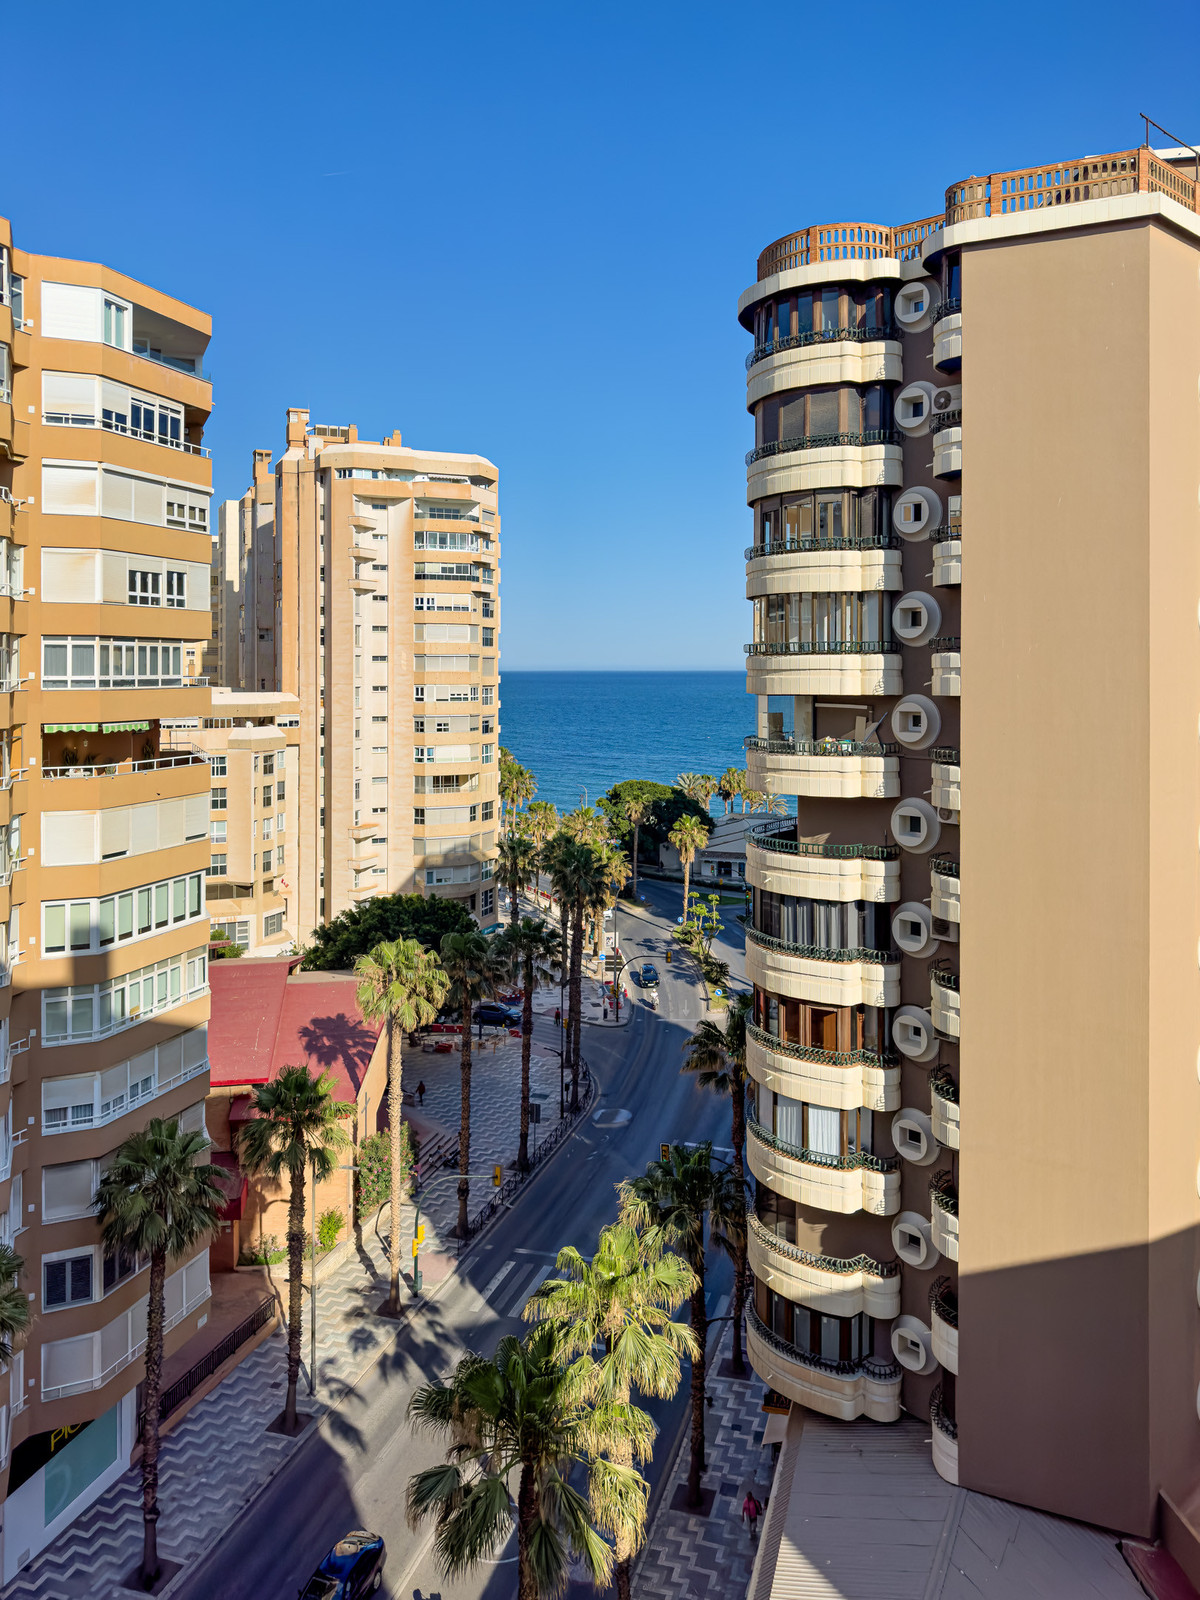 						Commercial  Other
													for sale 
																			 in Malaga Centro
					